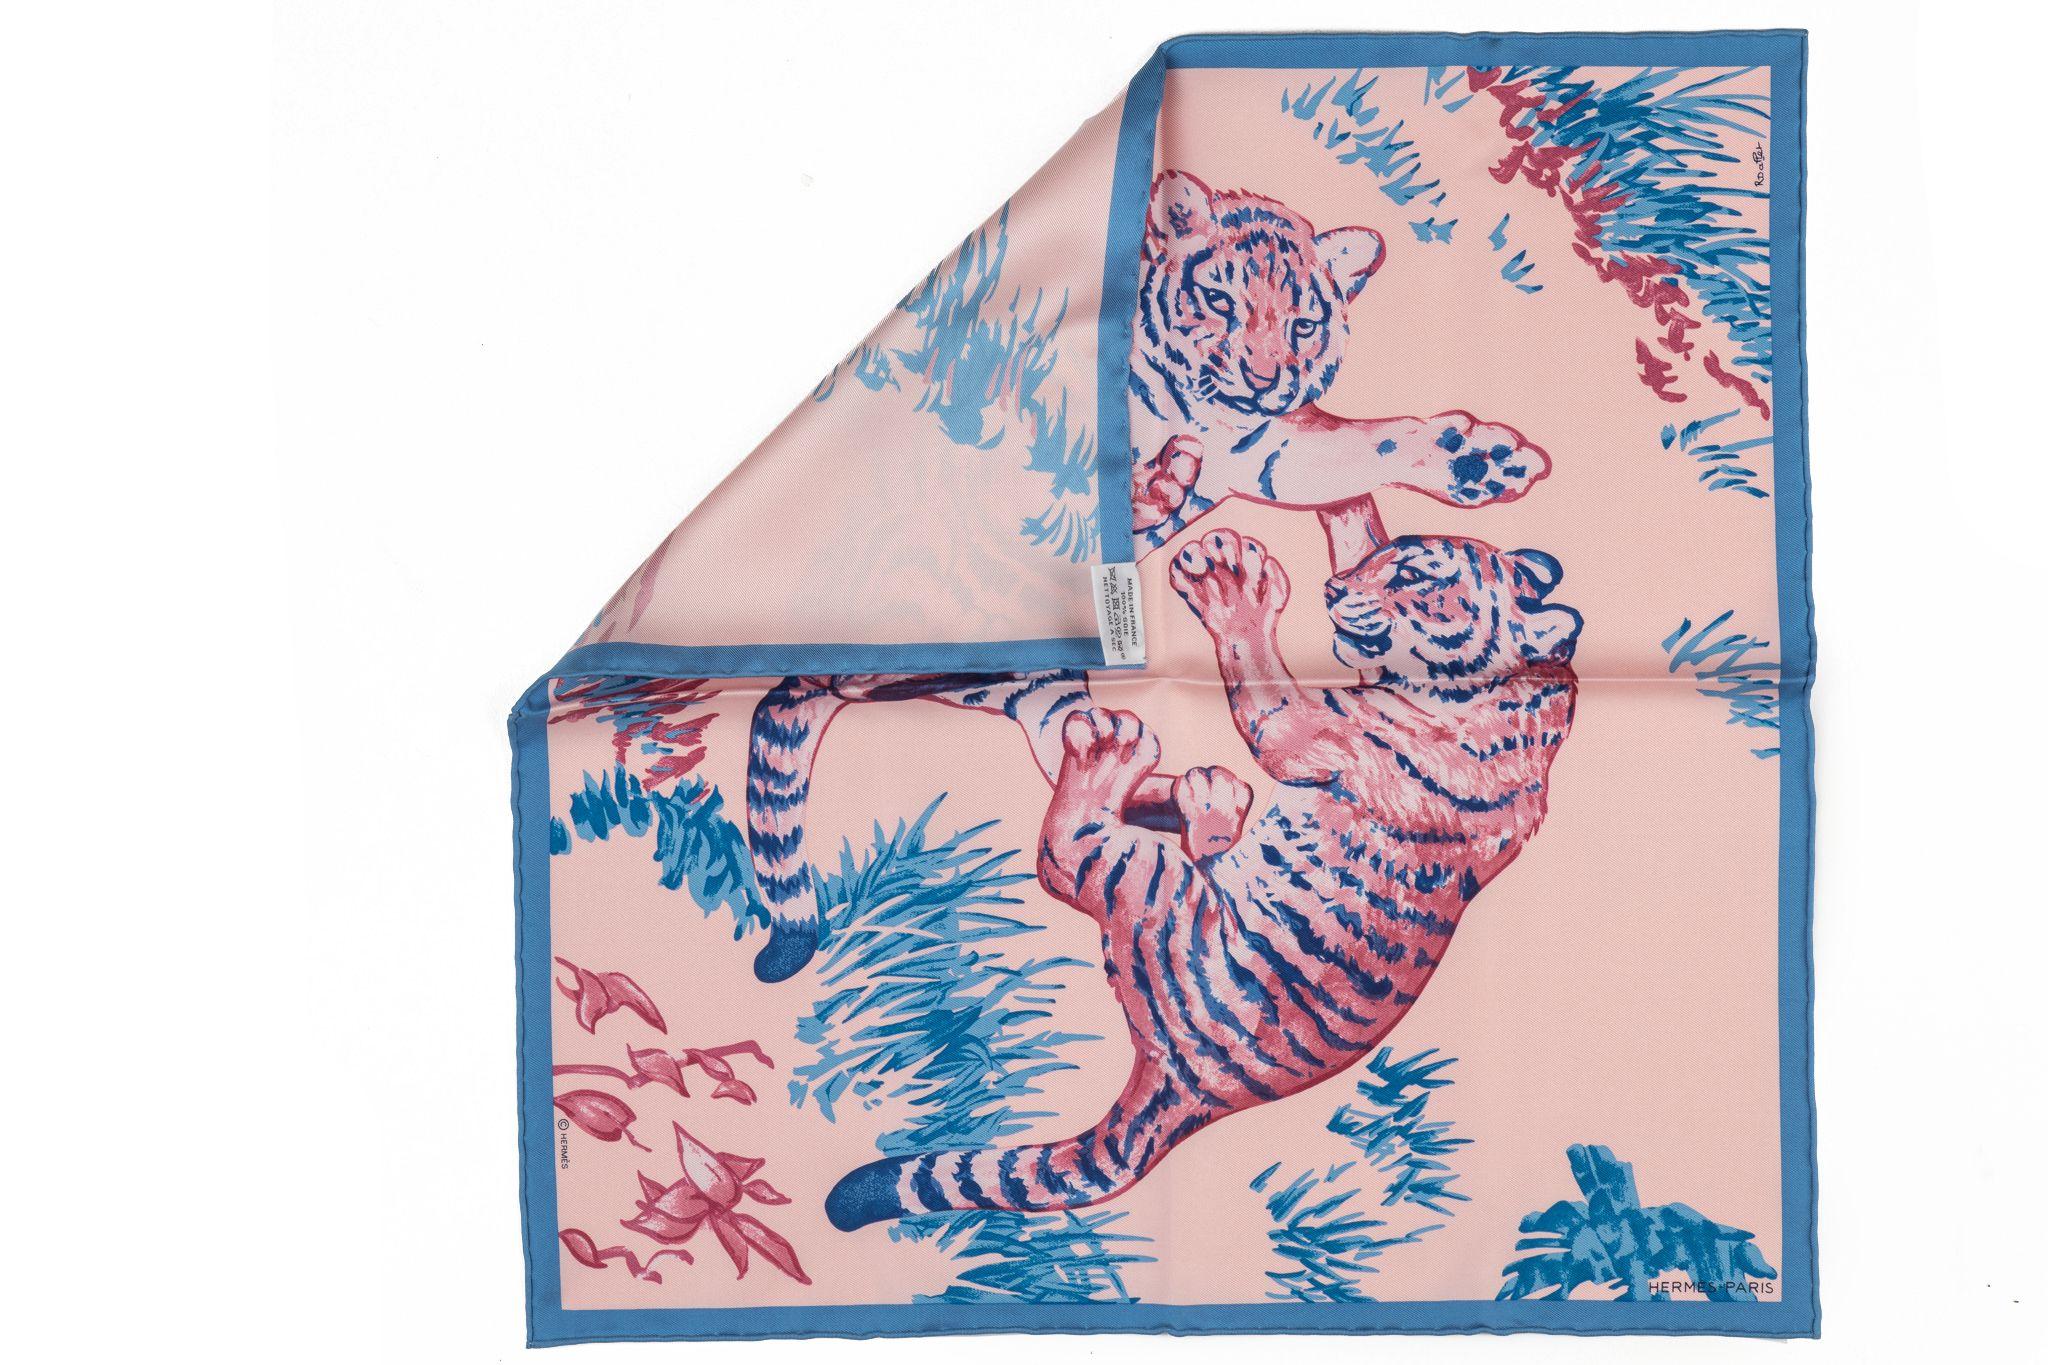 Hermès brand new rare pink and celeste tiger Cubs silk gavroche. Hand rolled trim. Comes with original box.